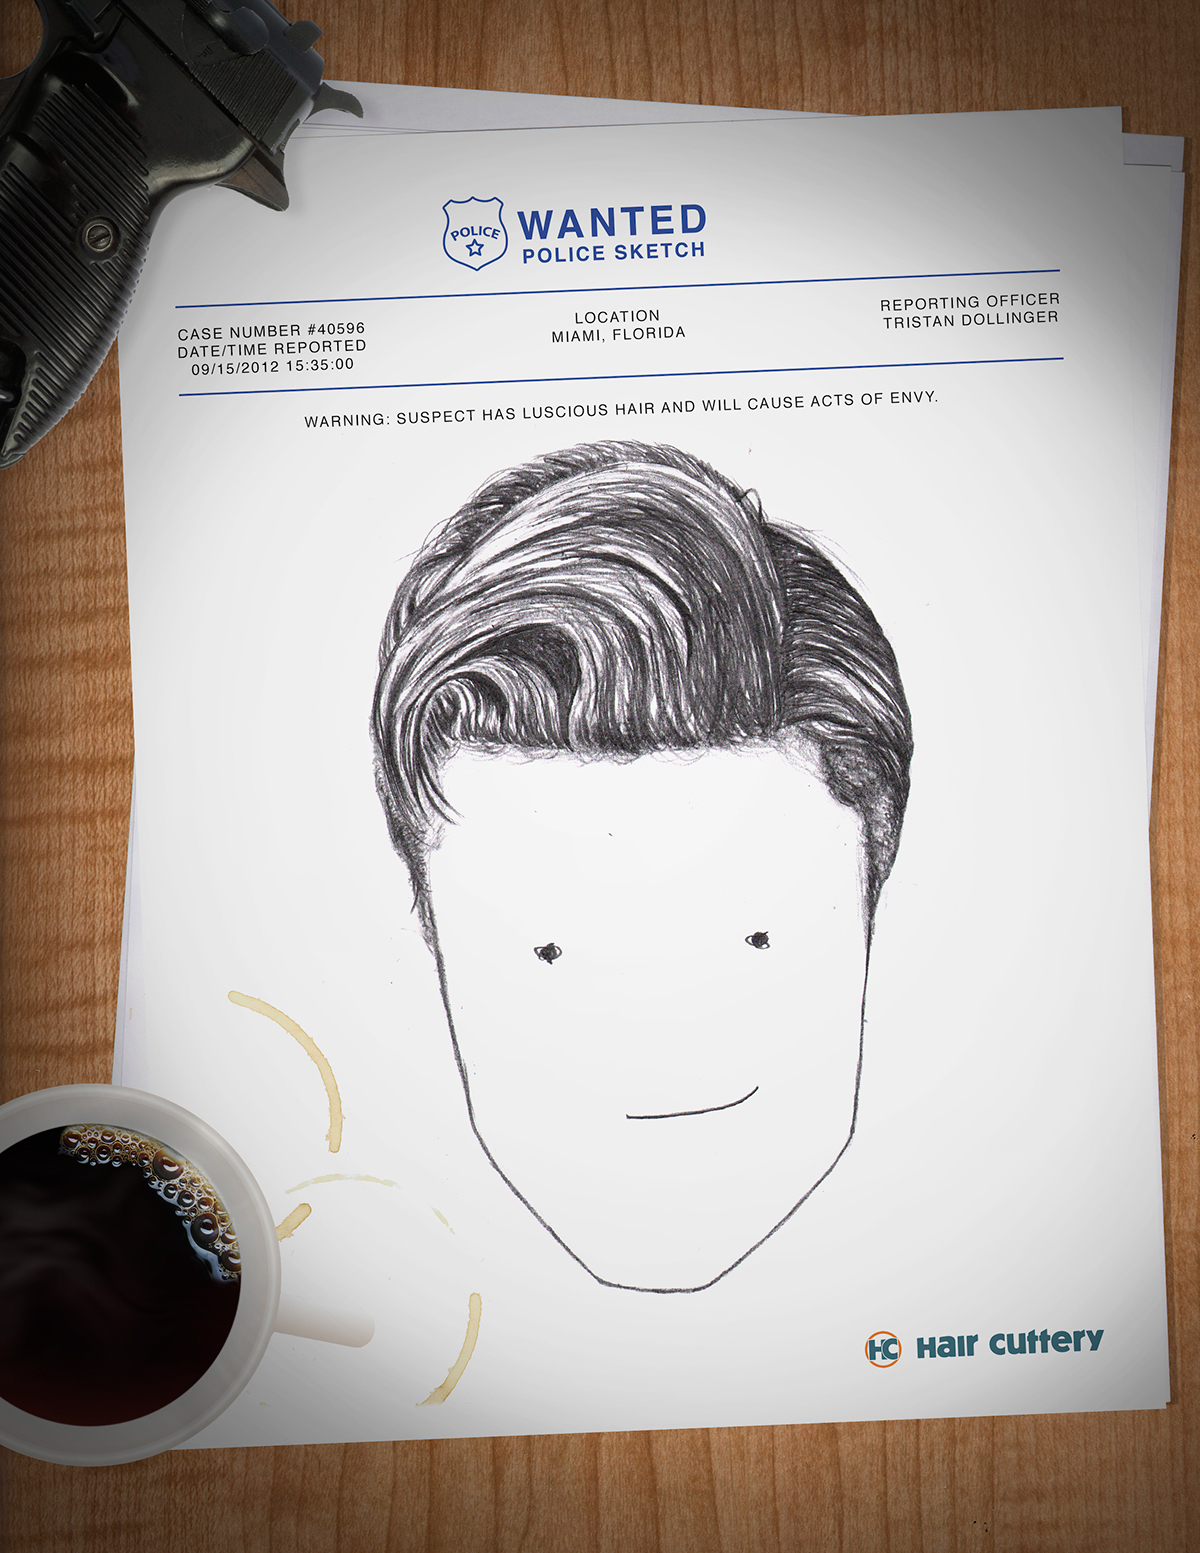 hair hair cuttery funny silly police wanted